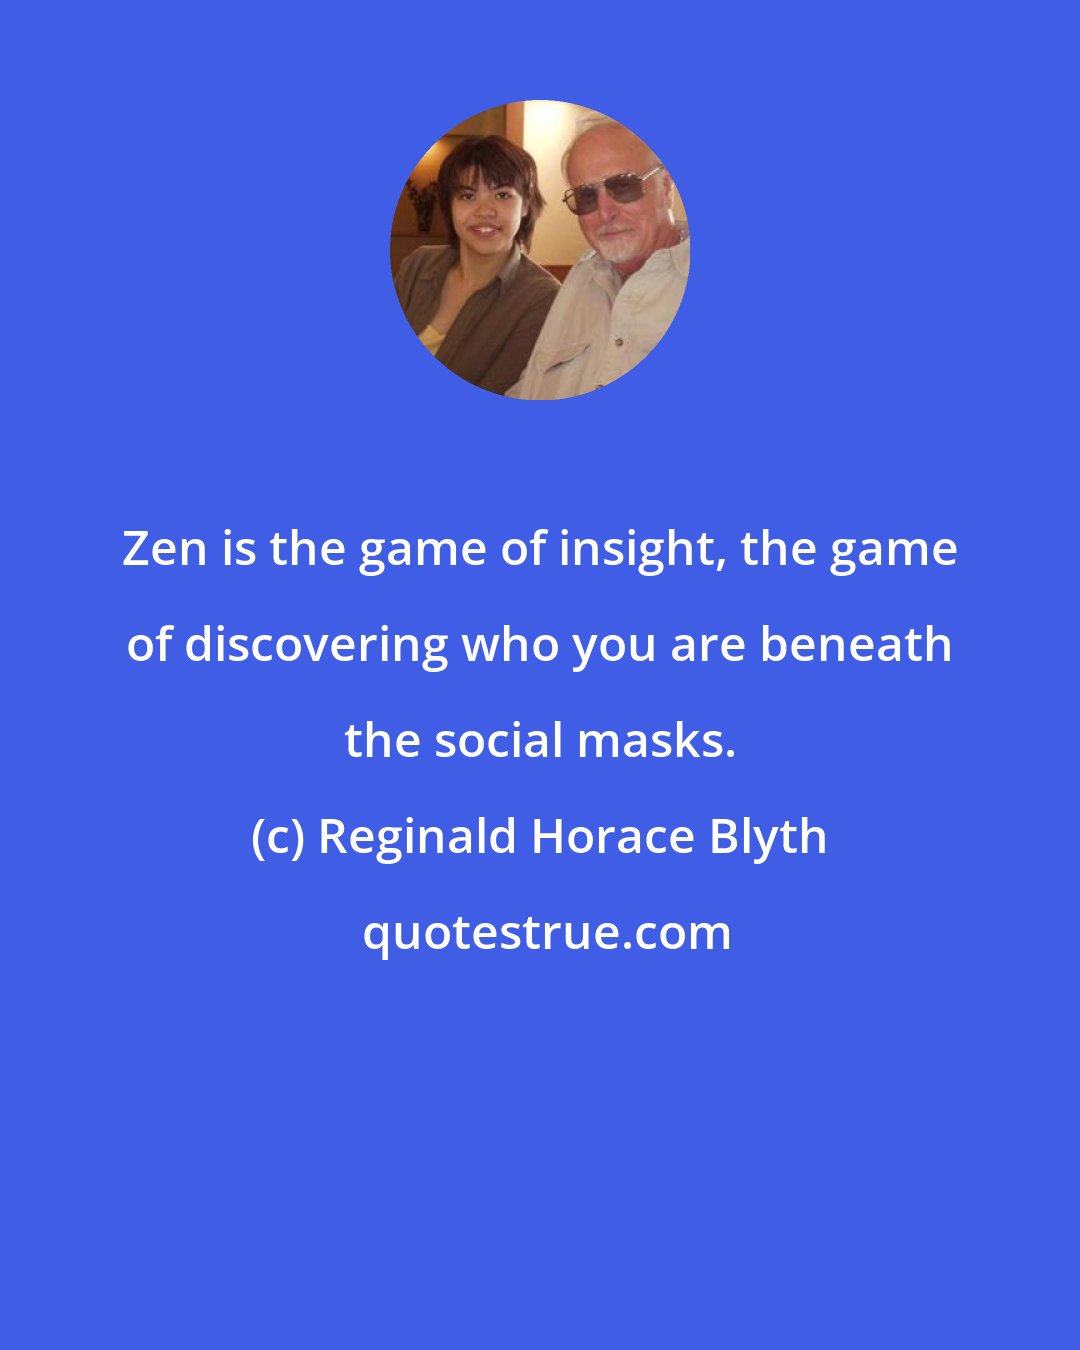 Reginald Horace Blyth: Zen is the game of insight, the game of discovering who you are beneath the social masks.